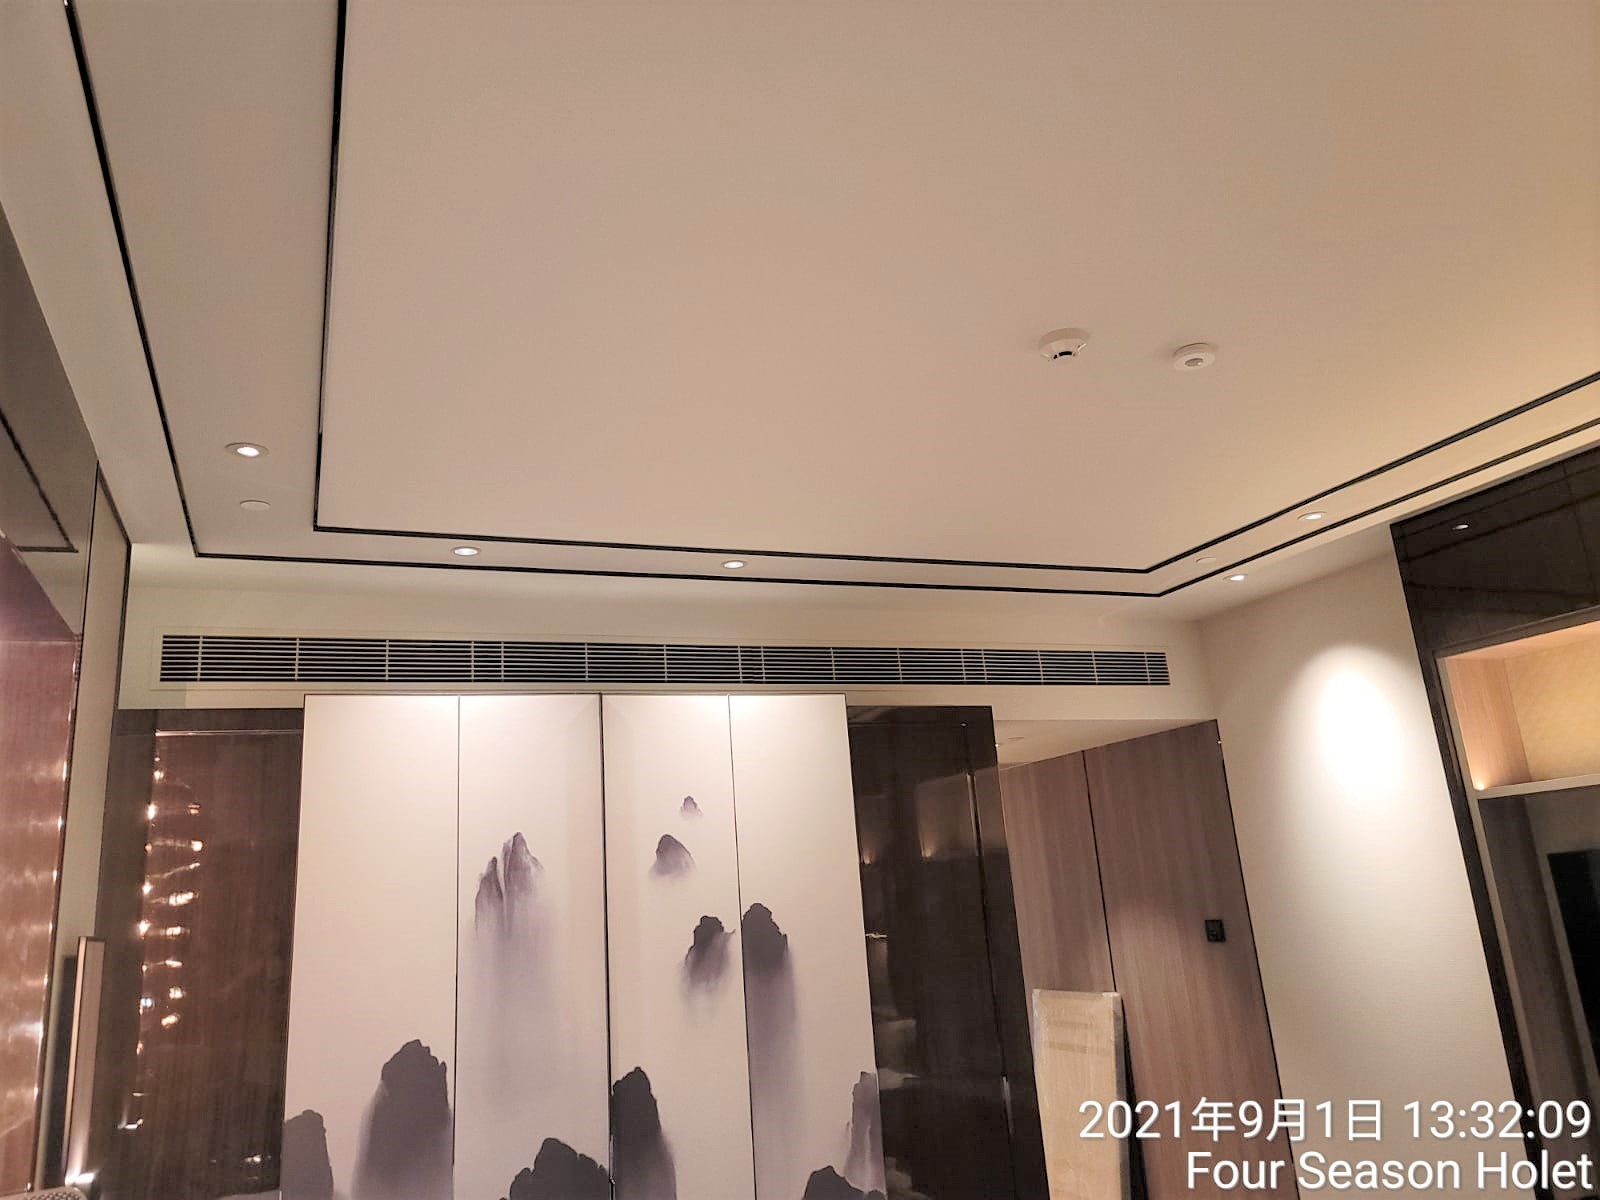 Interior Ceiling Works of Four Seasons Hotel Hong Kong Completed